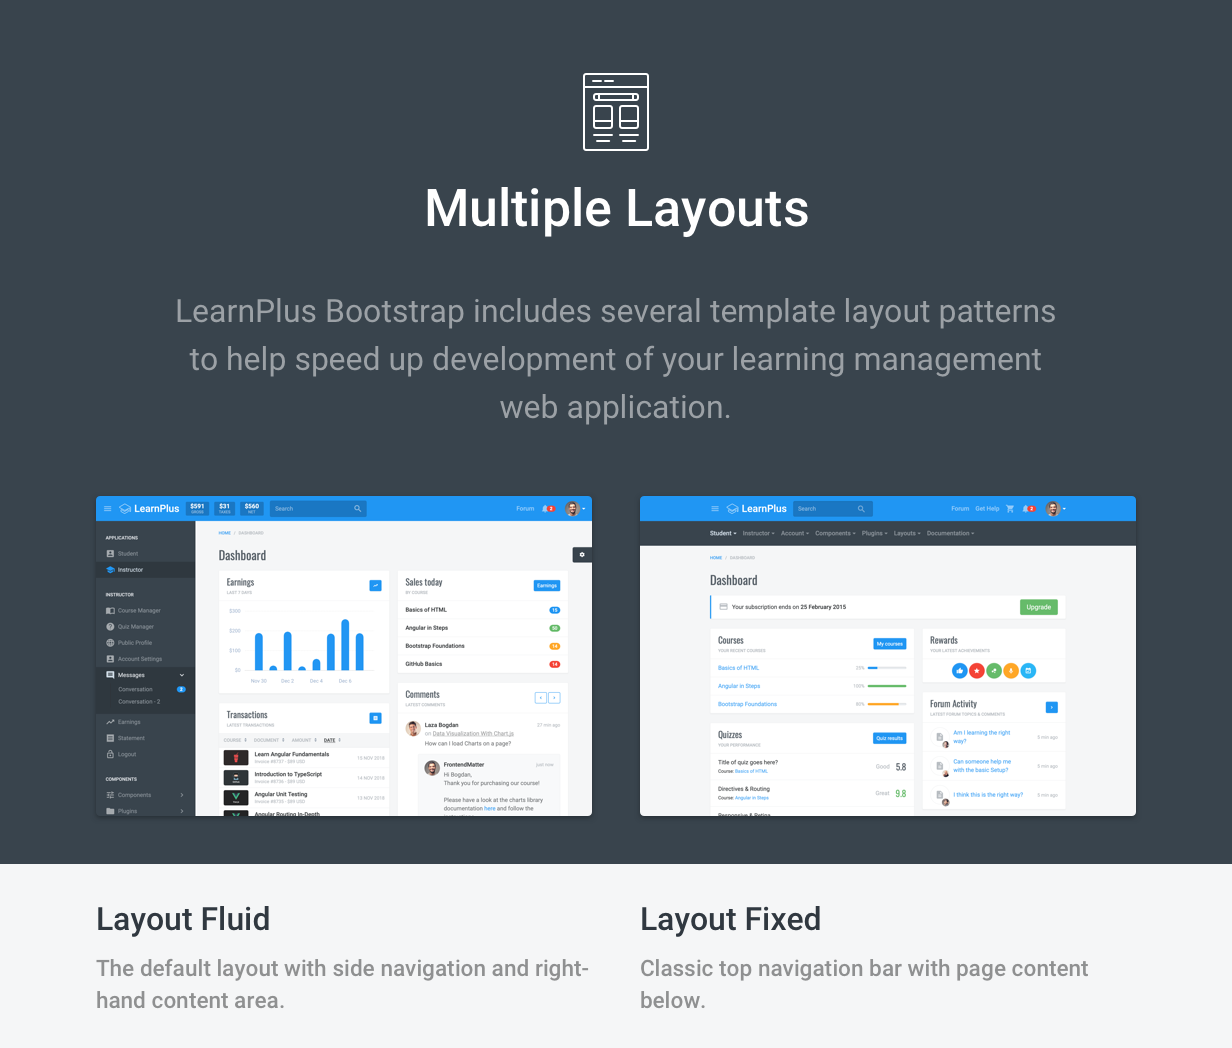 LearnPlus Bootstrap - Learning Dashboard - includes multiple layouts